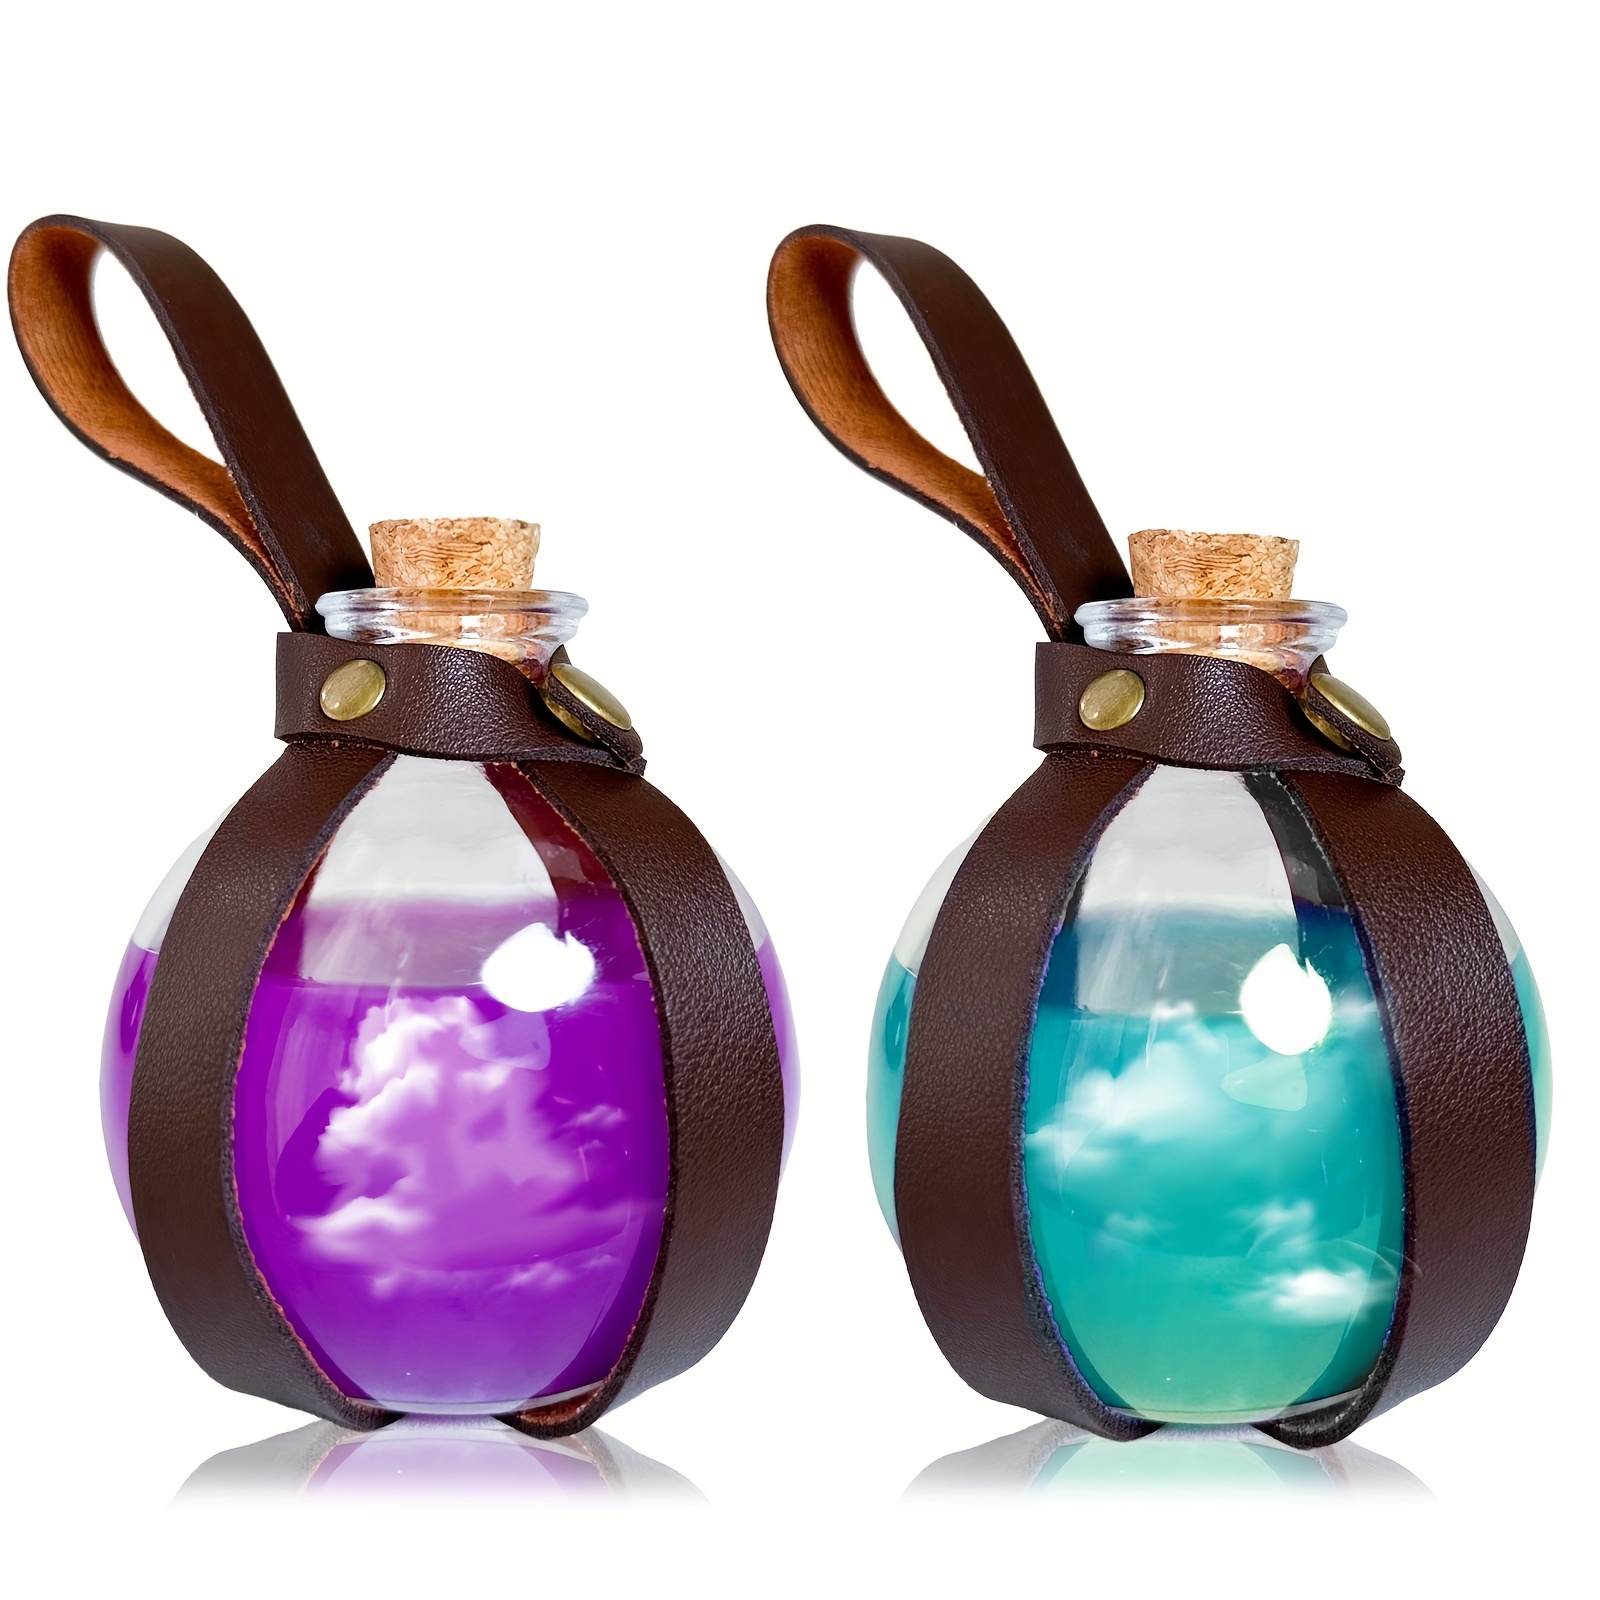 Gejoy 2 Pcs 16.9 oz / 500 ml Halloween Potion Bottle with Cork Light up  Glass Lamp Birthday Gift with LED Battery Operated Potion Bottles Cork  Lights